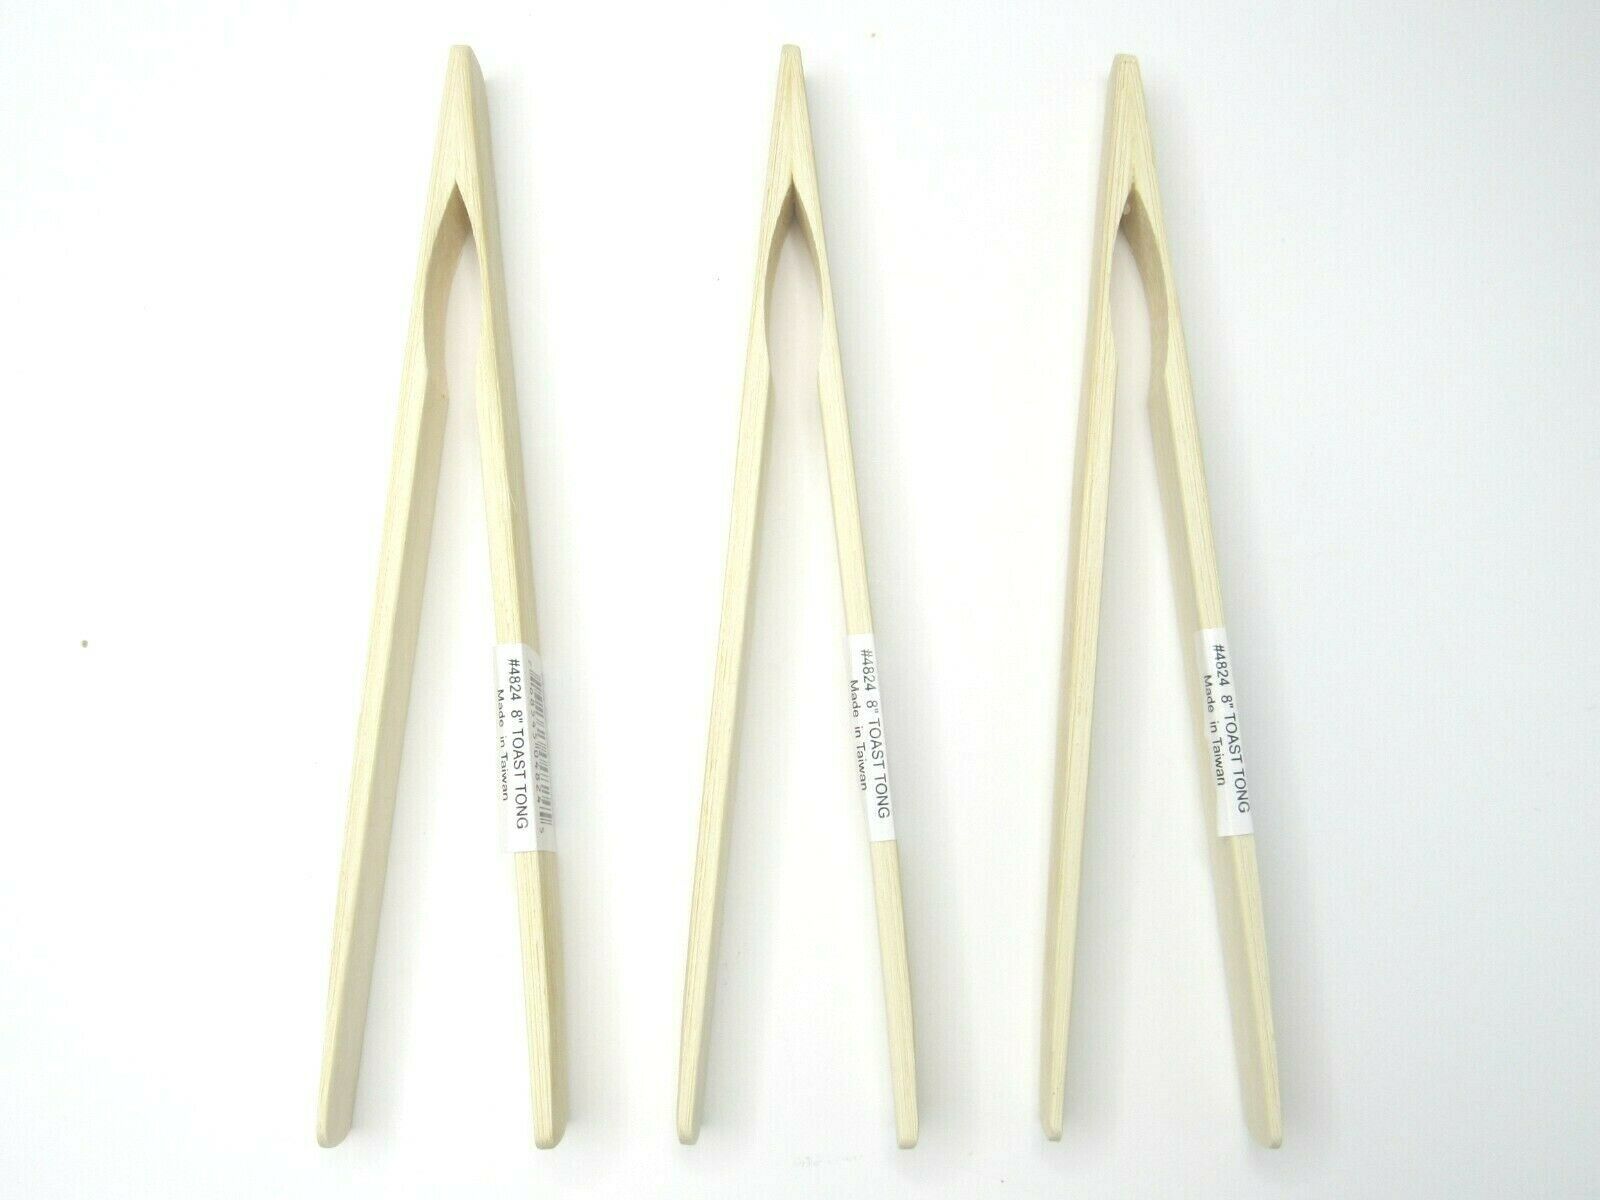 3 Bamboo 8" Toast Tongs Kitchen Cooking Saute Stir Fry Vegetable Meat Asian NEW - $17.81